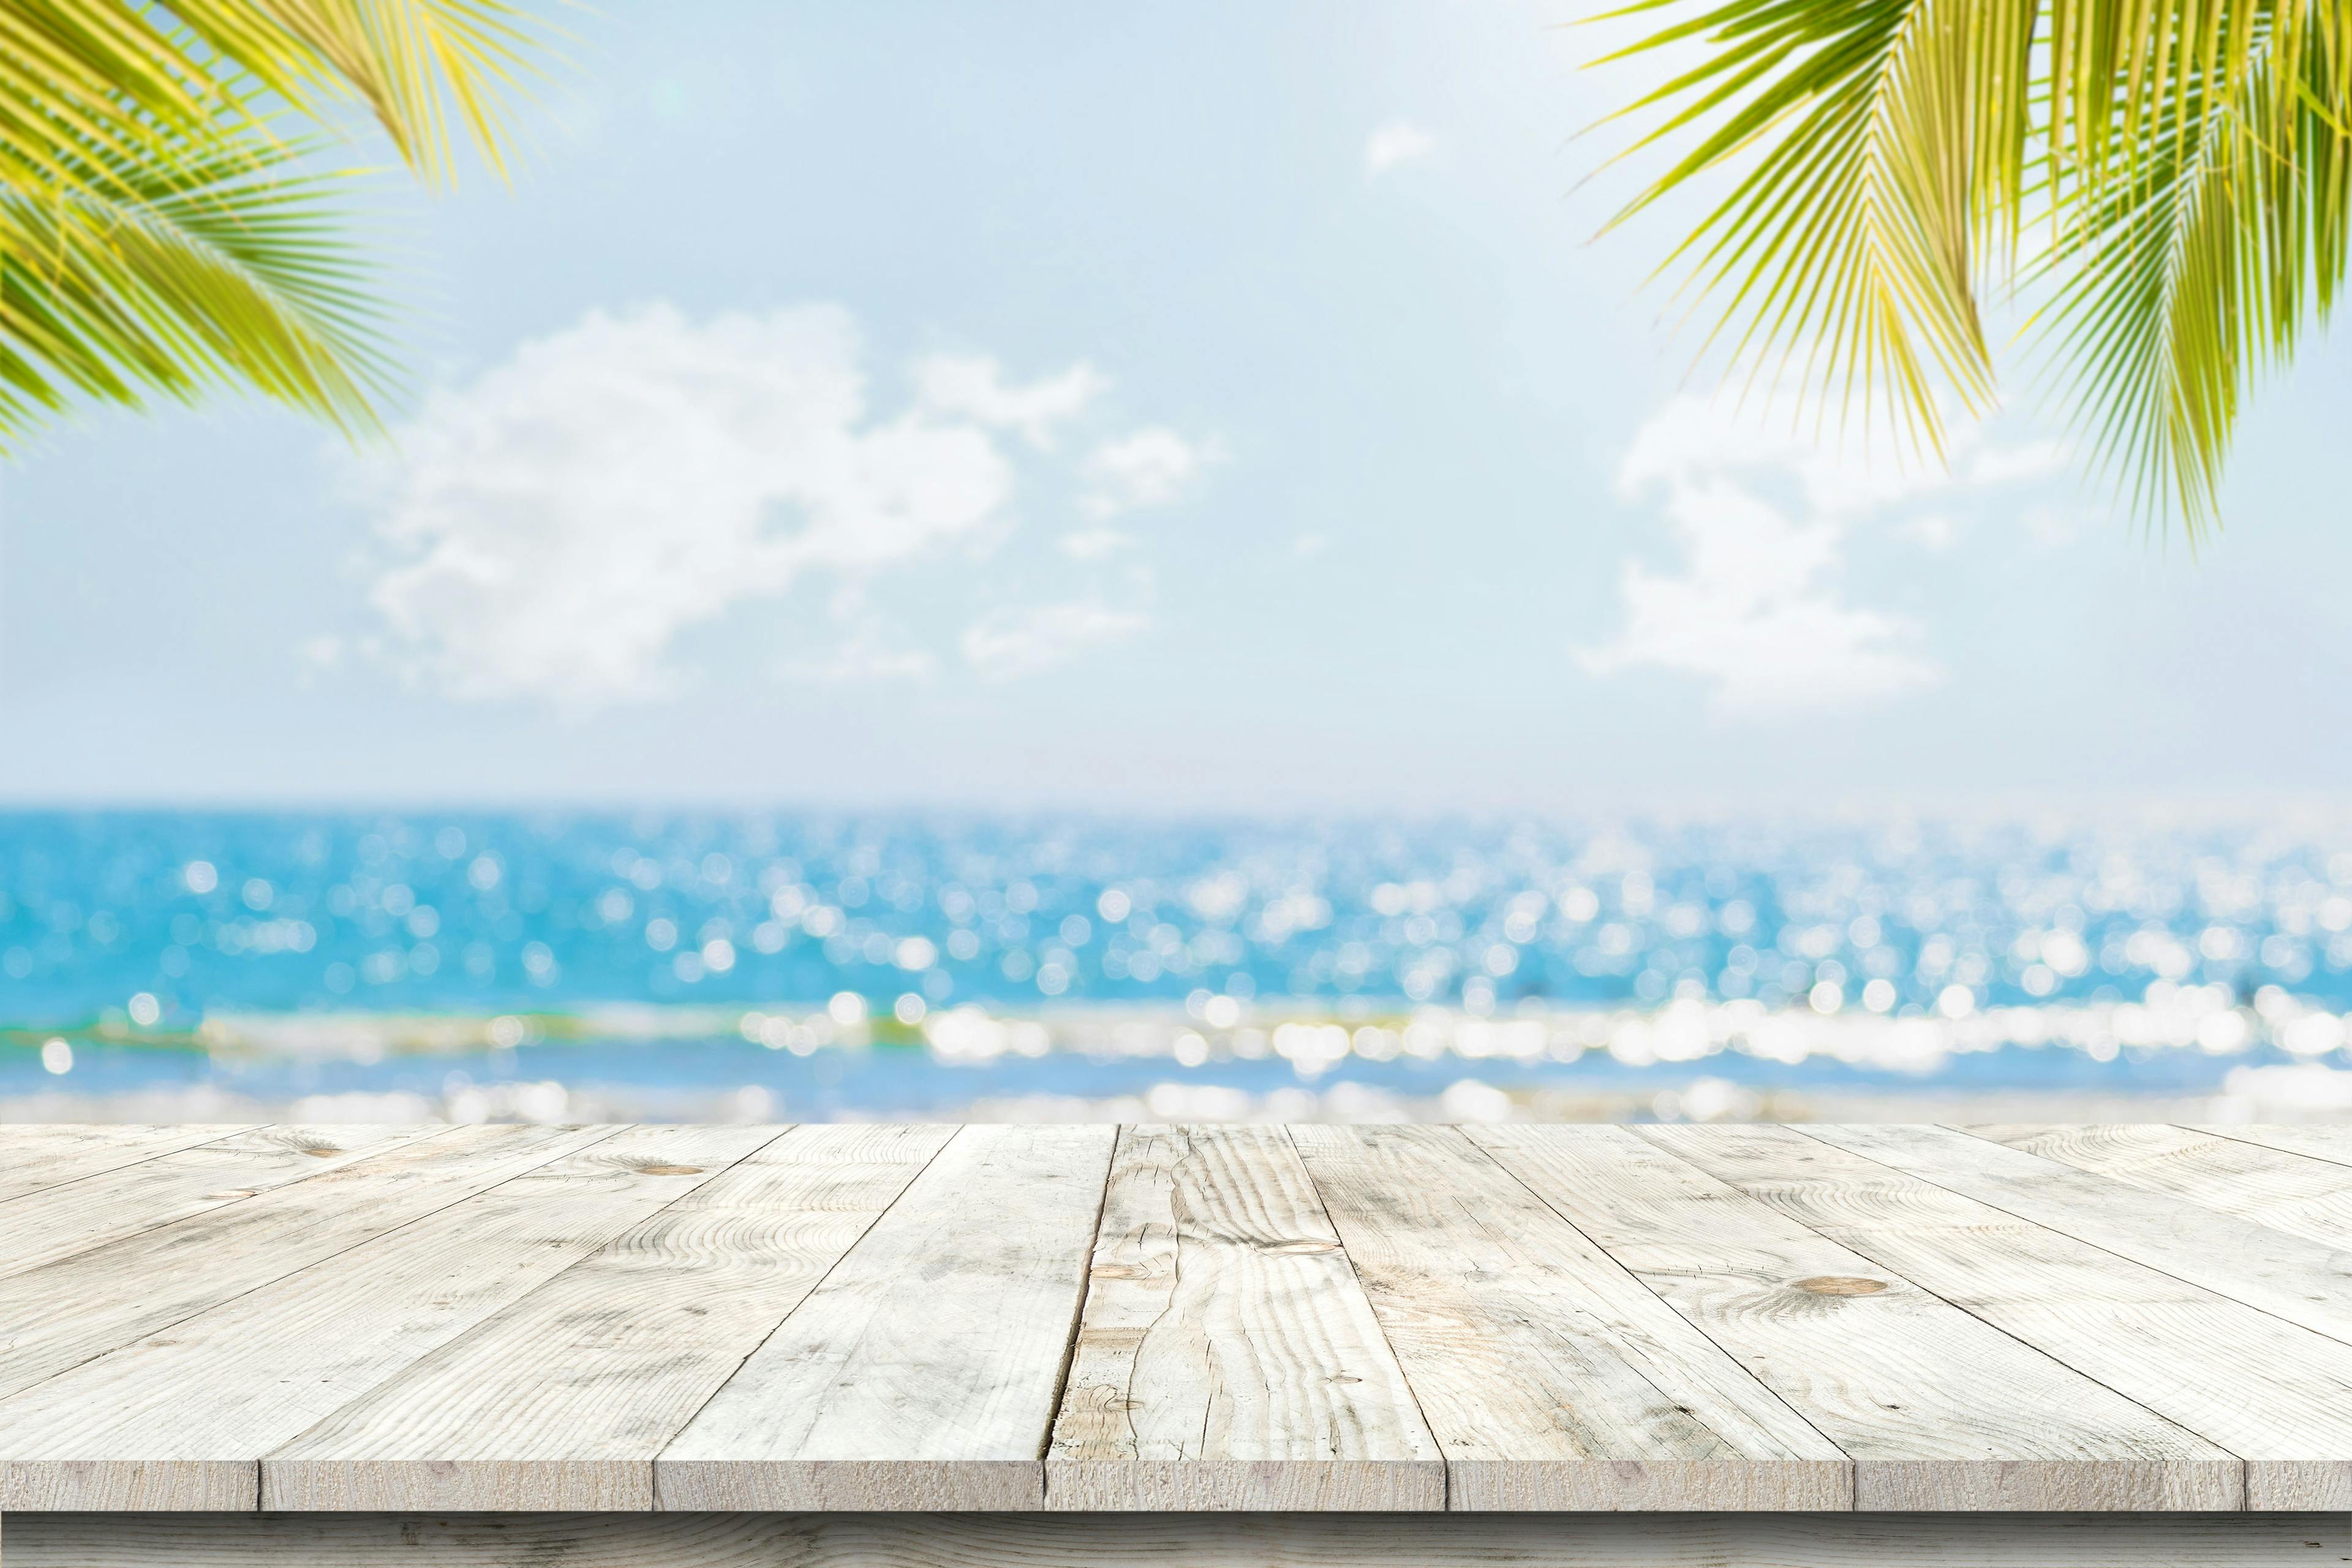 Top of wood table with seascape and palm leaves, blur bokeh light of calm sea and sky at tropical beach background. Empty ready for your product display montage. summer vacation background concept - Image credit: jakkapan | stock.adobe.com